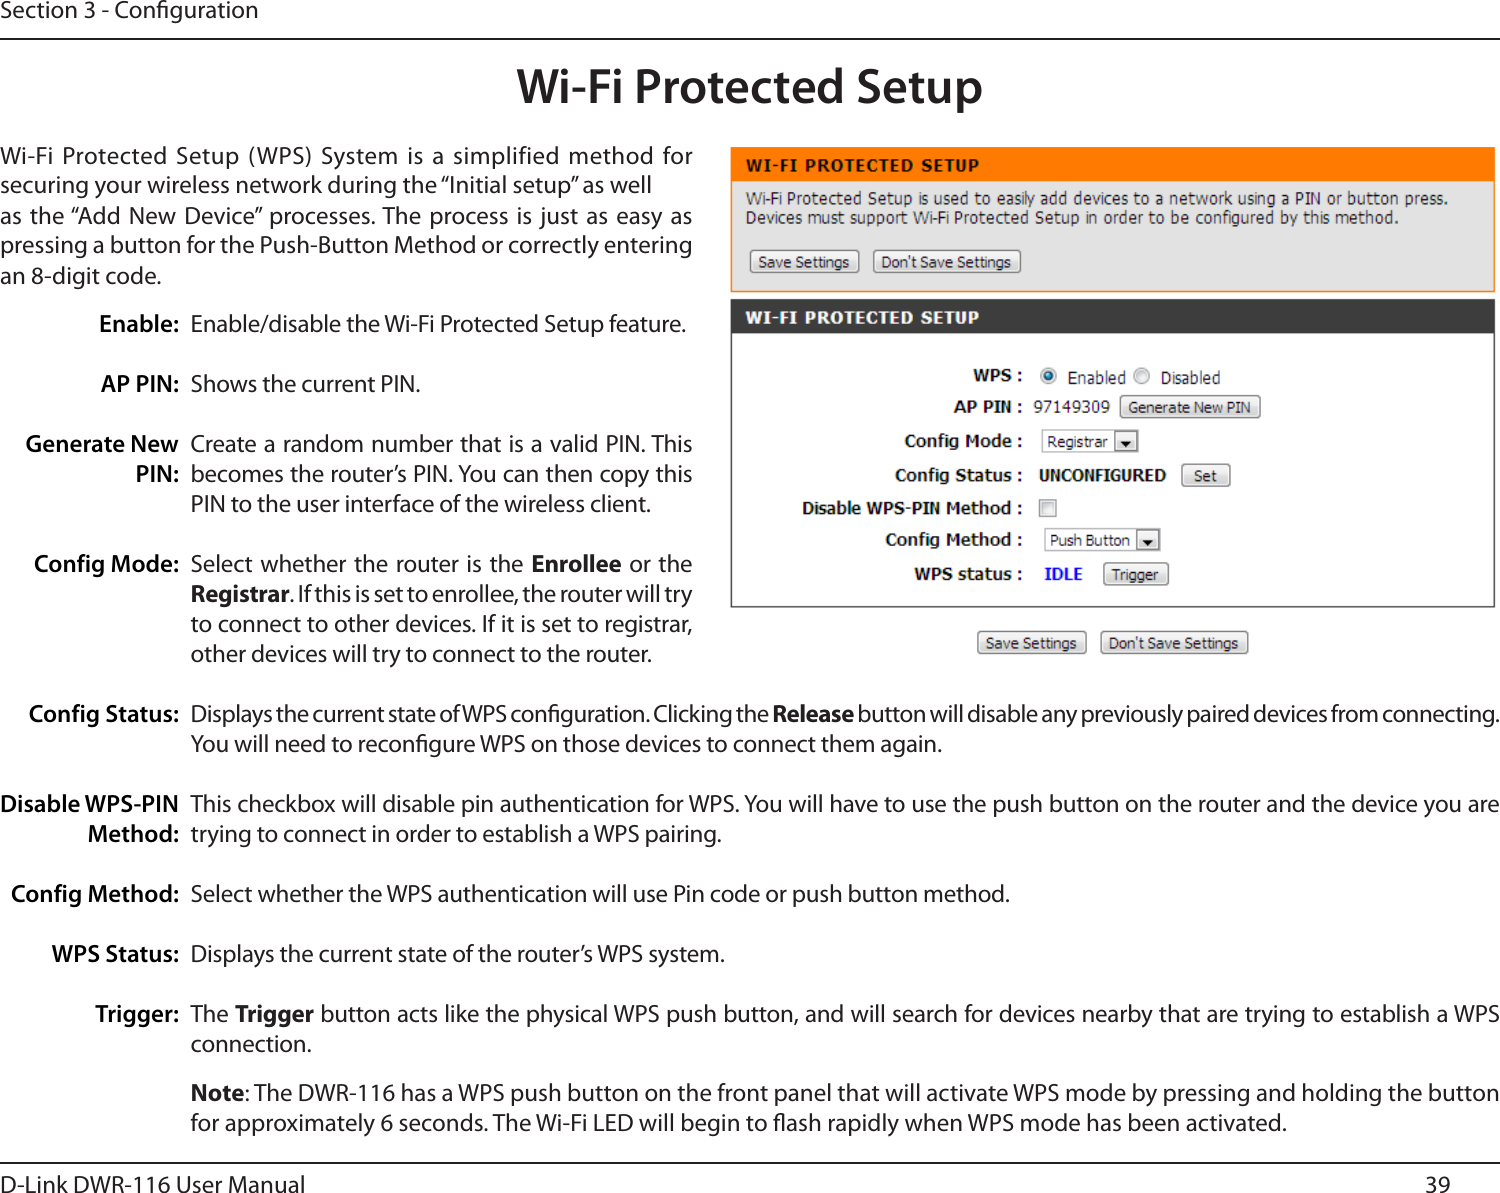 39D-Link DWR-116 User ManualSection 3 - CongurationWi-Fi Protected SetupWi-Fi Protected Setup (WPS) System is a  simplified method for securing your wireless network during the “Initial setup” as wellas the “Add New Device” processes. The process is just  as easy as pressing a button for the Push-Button Method or correctly entering an 8-digit code.Enable/disable the Wi-Fi Protected Setup feature.Shows the current PIN.Create a random number that is a valid PIN. This becomes the router’s PIN. You can then copy this PIN to the user interface of the wireless client.Select whether the router is the Enrollee or the Registrar. If this is set to enrollee, the router will try to connect to other devices. If it is set to registrar, other devices will try to connect to the router.Displays the current state of WPS conguration. Clicking the Release button will disable any previously paired devices from connecting. You will need to recongure WPS on those devices to connect them again.This checkbox will disable pin authentication for WPS. You will have to use the push button on the router and the device you are trying to connect in order to establish a WPS pairing.Select whether the WPS authentication will use Pin code or push button method.Displays the current state of the router’s WPS system.The Trigger button acts like the physical WPS push button, and will search for devices nearby that are trying to establish a WPS connection.Enable:AP PIN:Generate NewPIN:Config Mode:Config Status:Disable WPS-PIN Method:Config Method:WPS Status:Trigger:Note: The DWR-116 has a WPS push button on the front panel that will activate WPS mode by pressing and holding the button for approximately 6 seconds. The Wi-Fi LED will begin to ash rapidly when WPS mode has been activated.